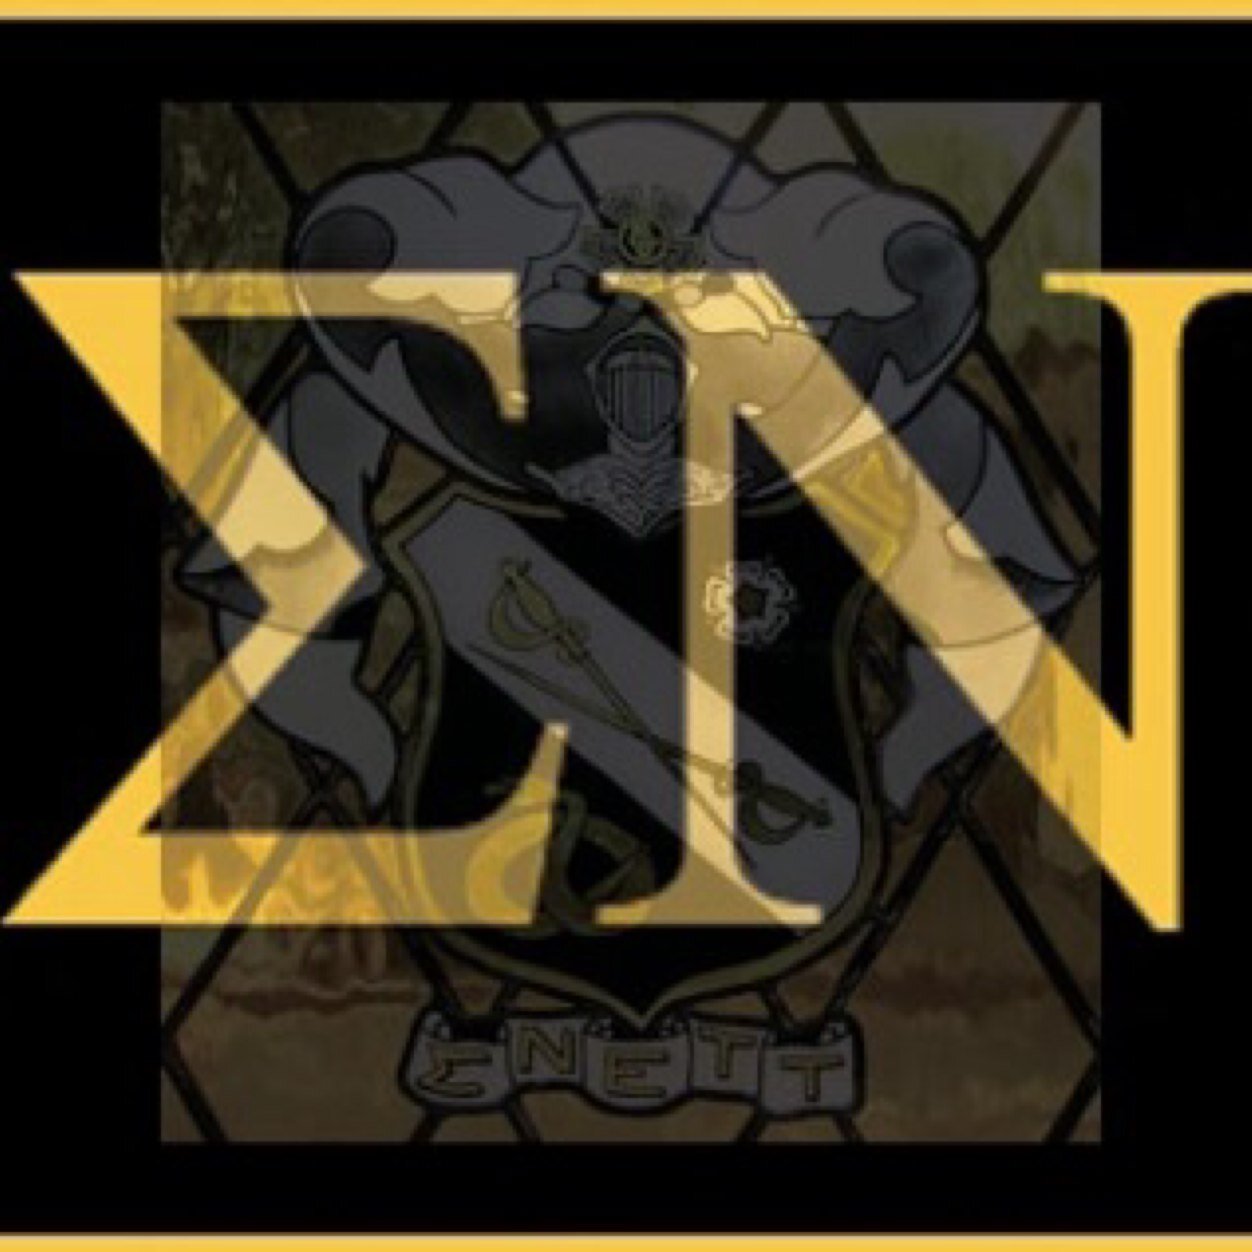 Eta Epsilon chapter of Sigma Nu Fraternity. Founded on Love, Truth and Honor.